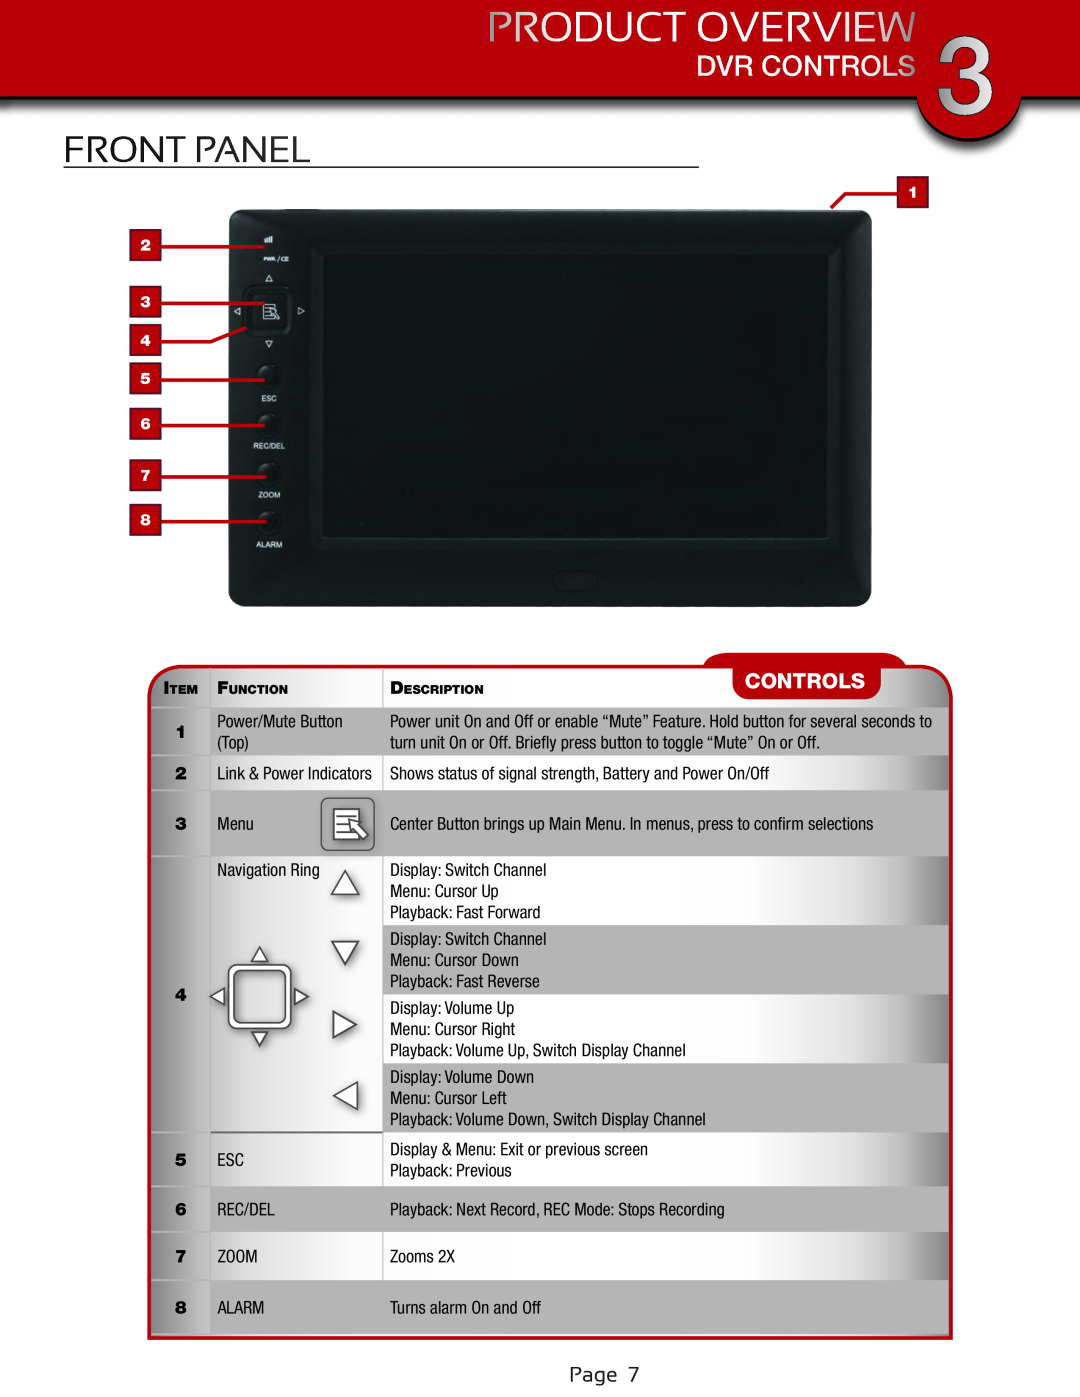 First Alert DWS-471, DWS-472 user manual Front Panel, Dvr Controls, Product Overview 